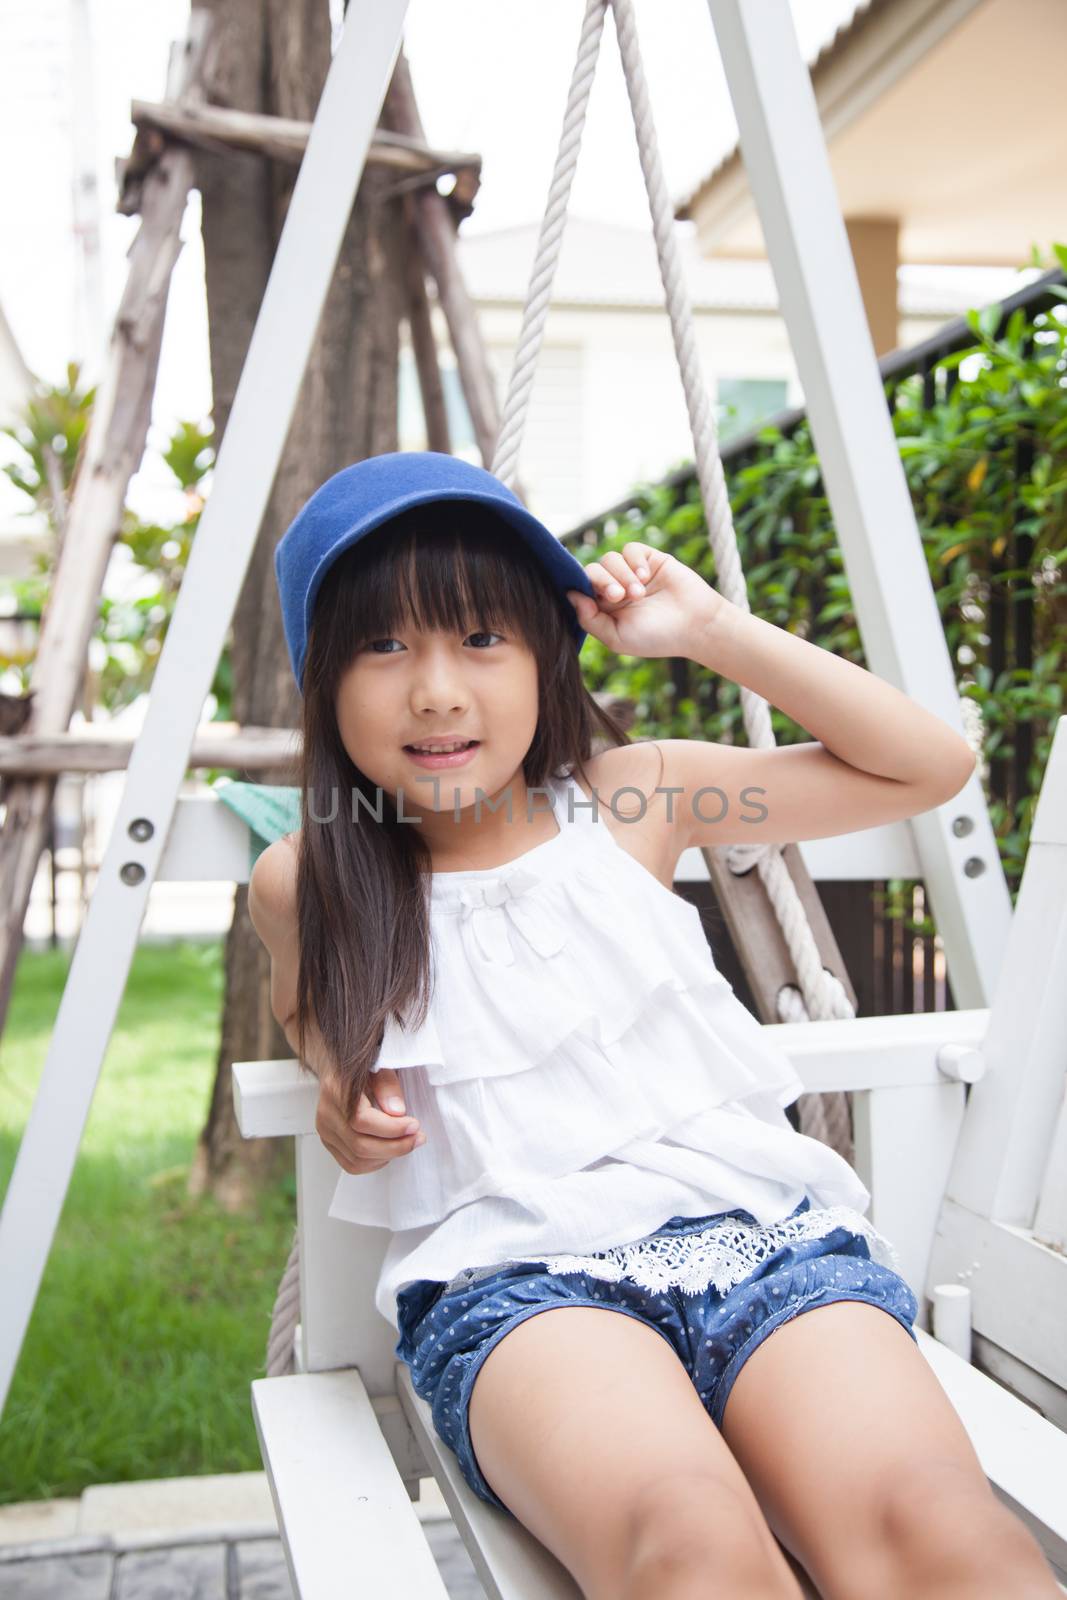 girl sitting on a swing. hand holding blue hat. Smiling and laughing